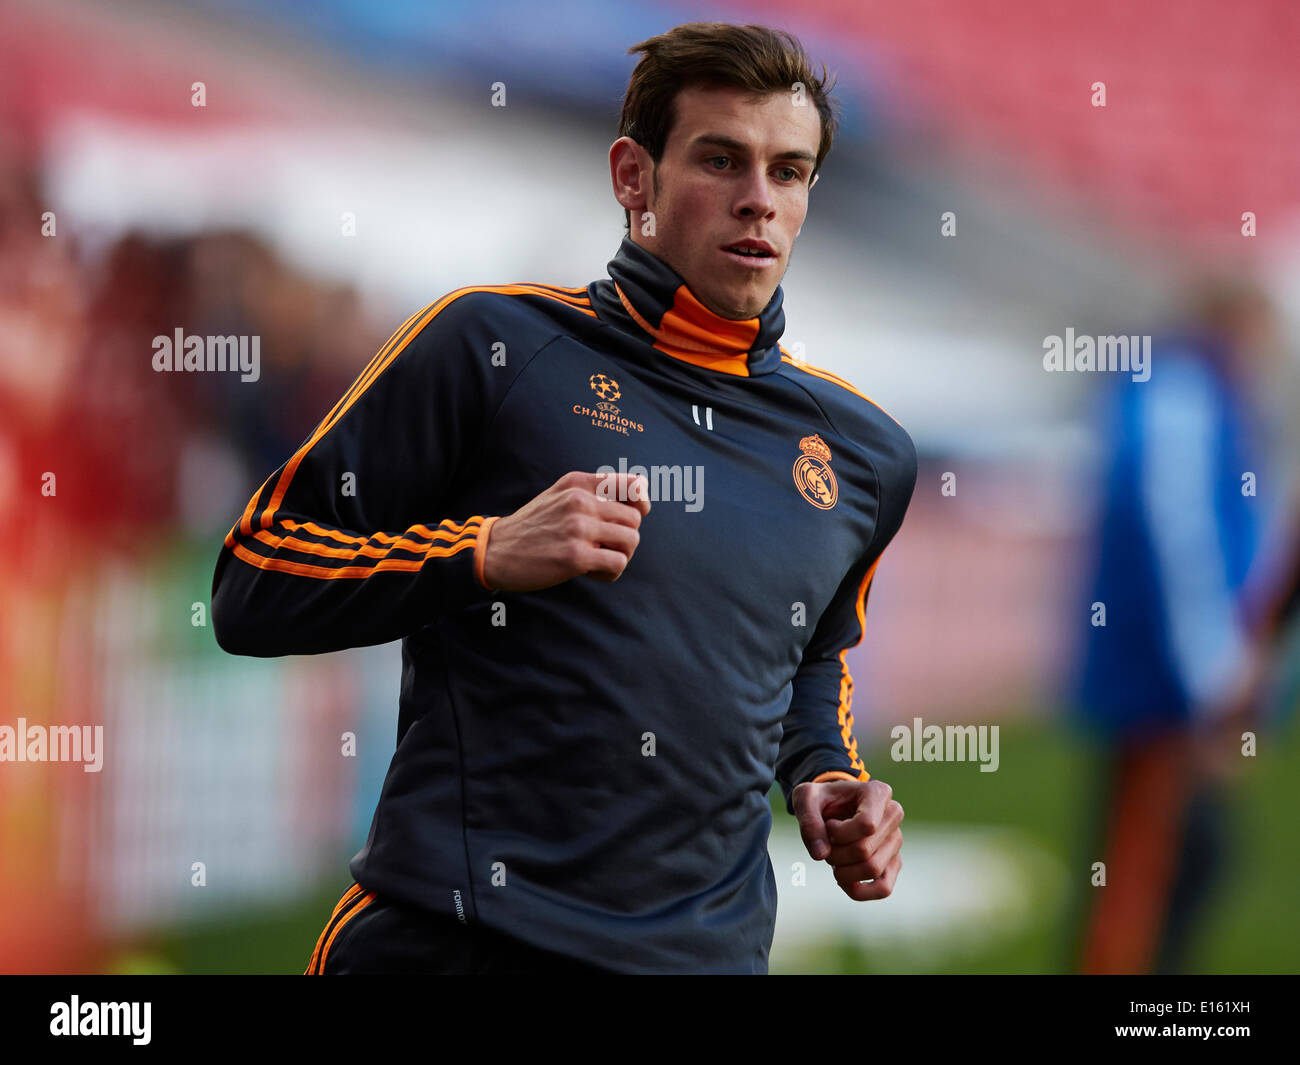 23.05.2014, Lisbon, Portugal. Midfielder Gareth Bale of Real Madrid in action during the Real Madrid training session prior to the UEFA Champions League final between Real Madrid and Atletico Madrid at Sport Lisboa e Benfica Stadium, Lisbon, Portugal Stock Photo